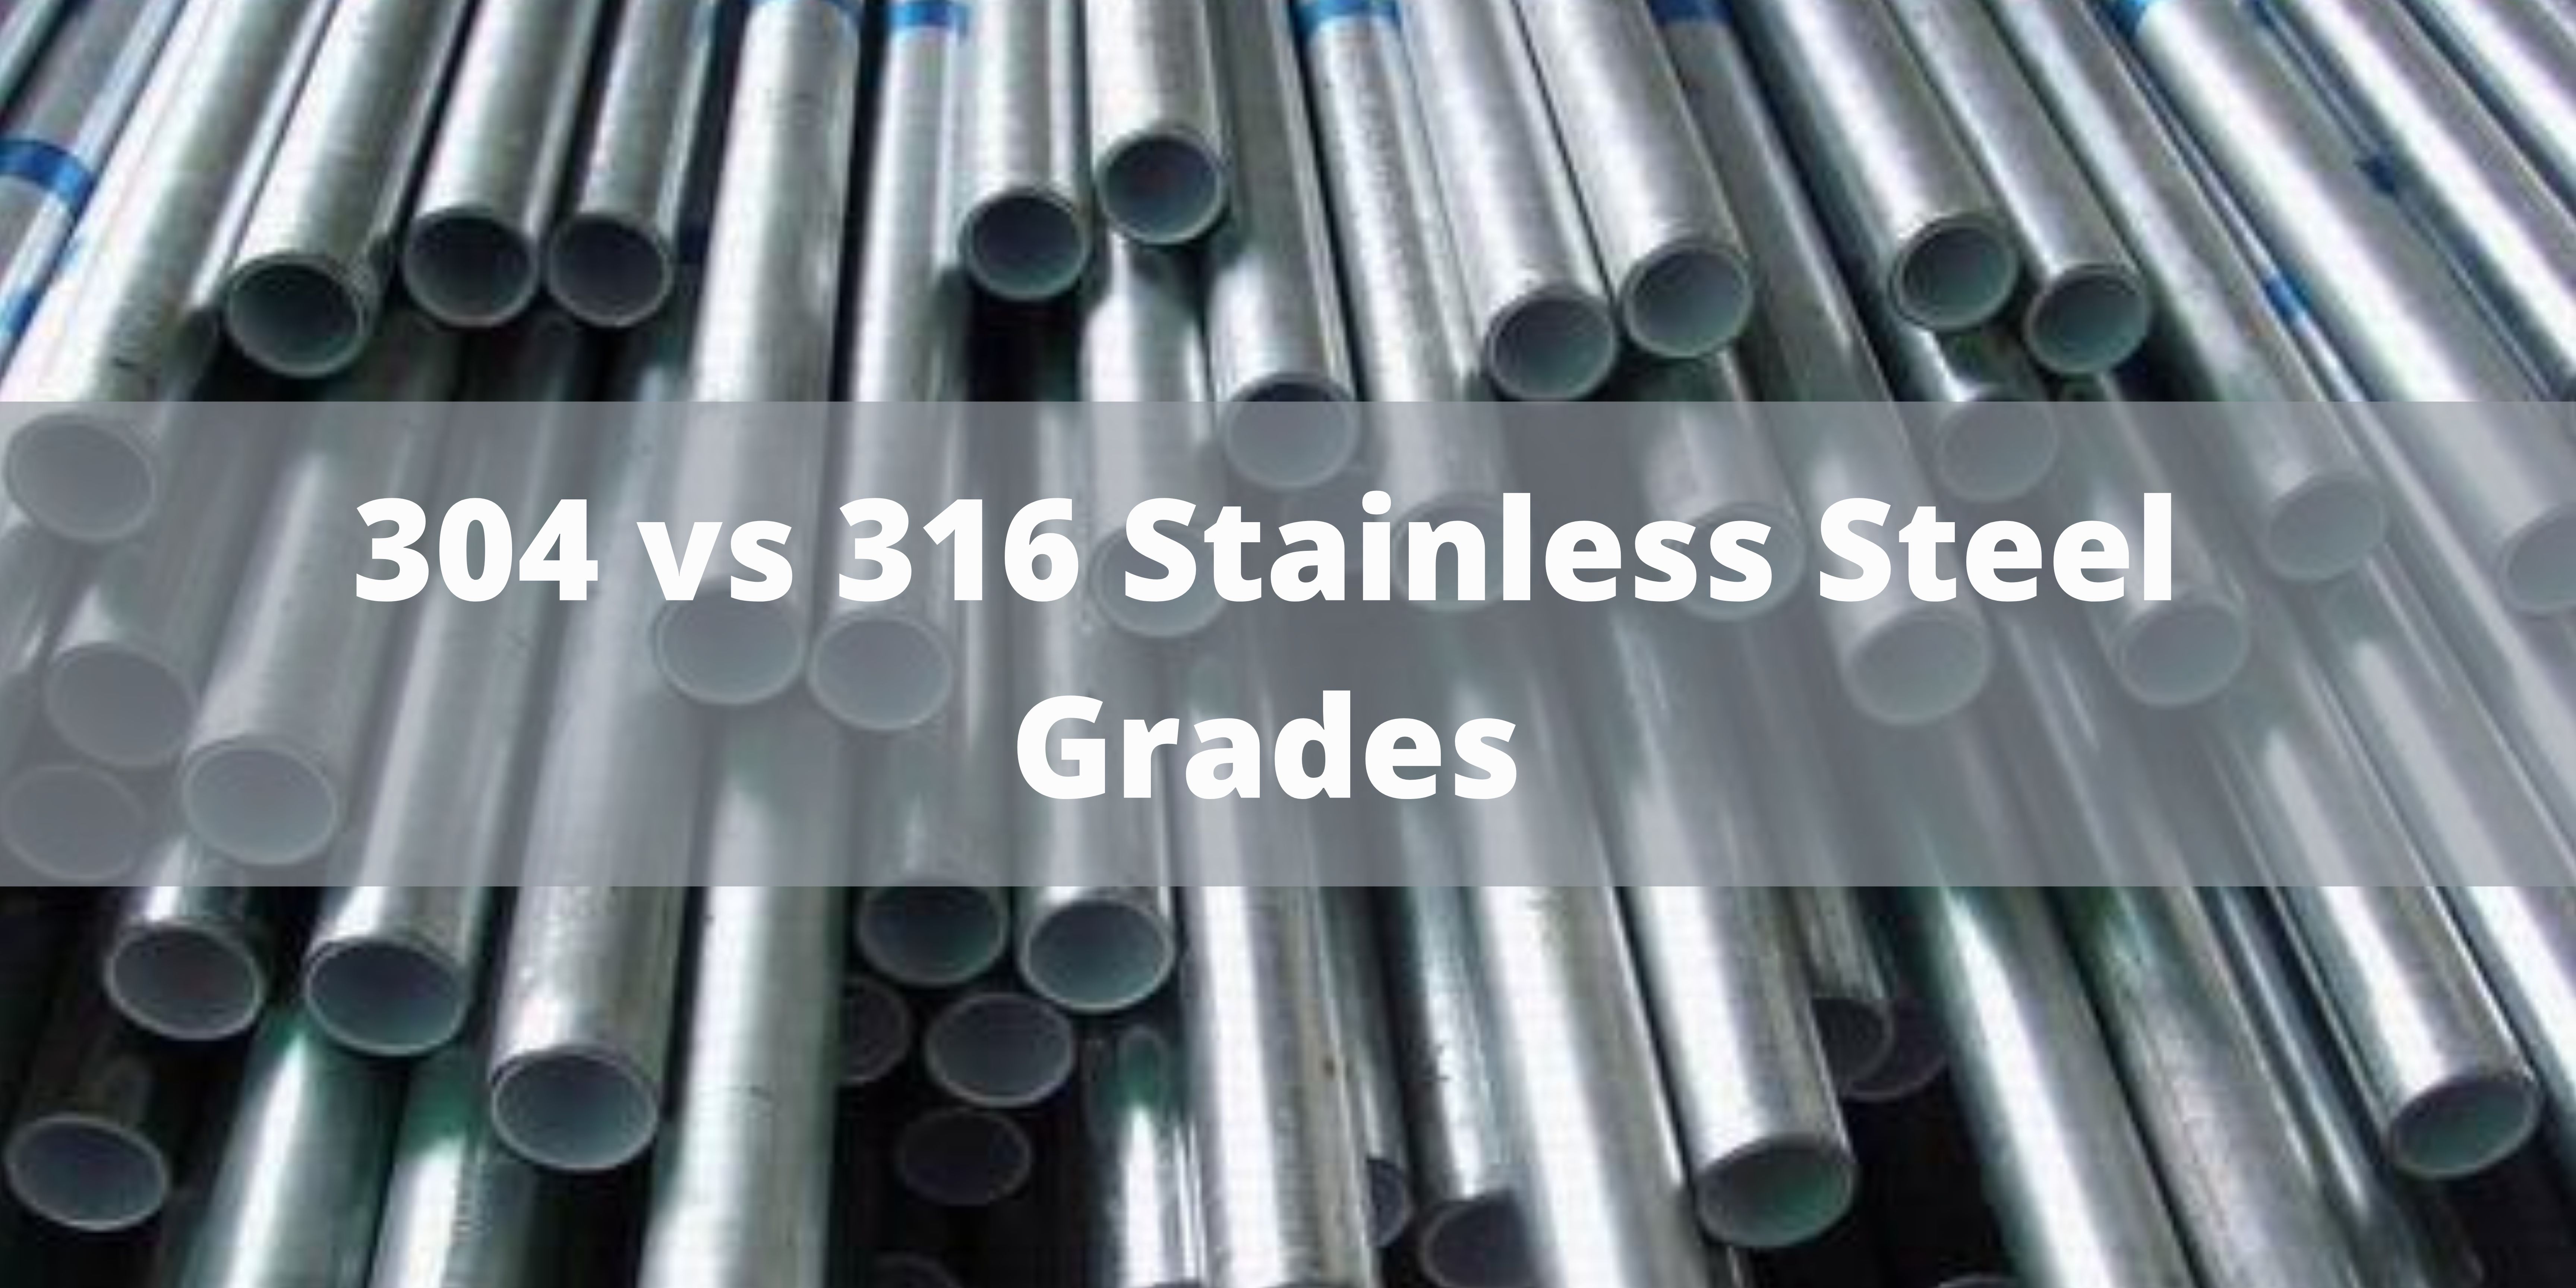 A Look at the Differences between Titanium and Stainless Steel